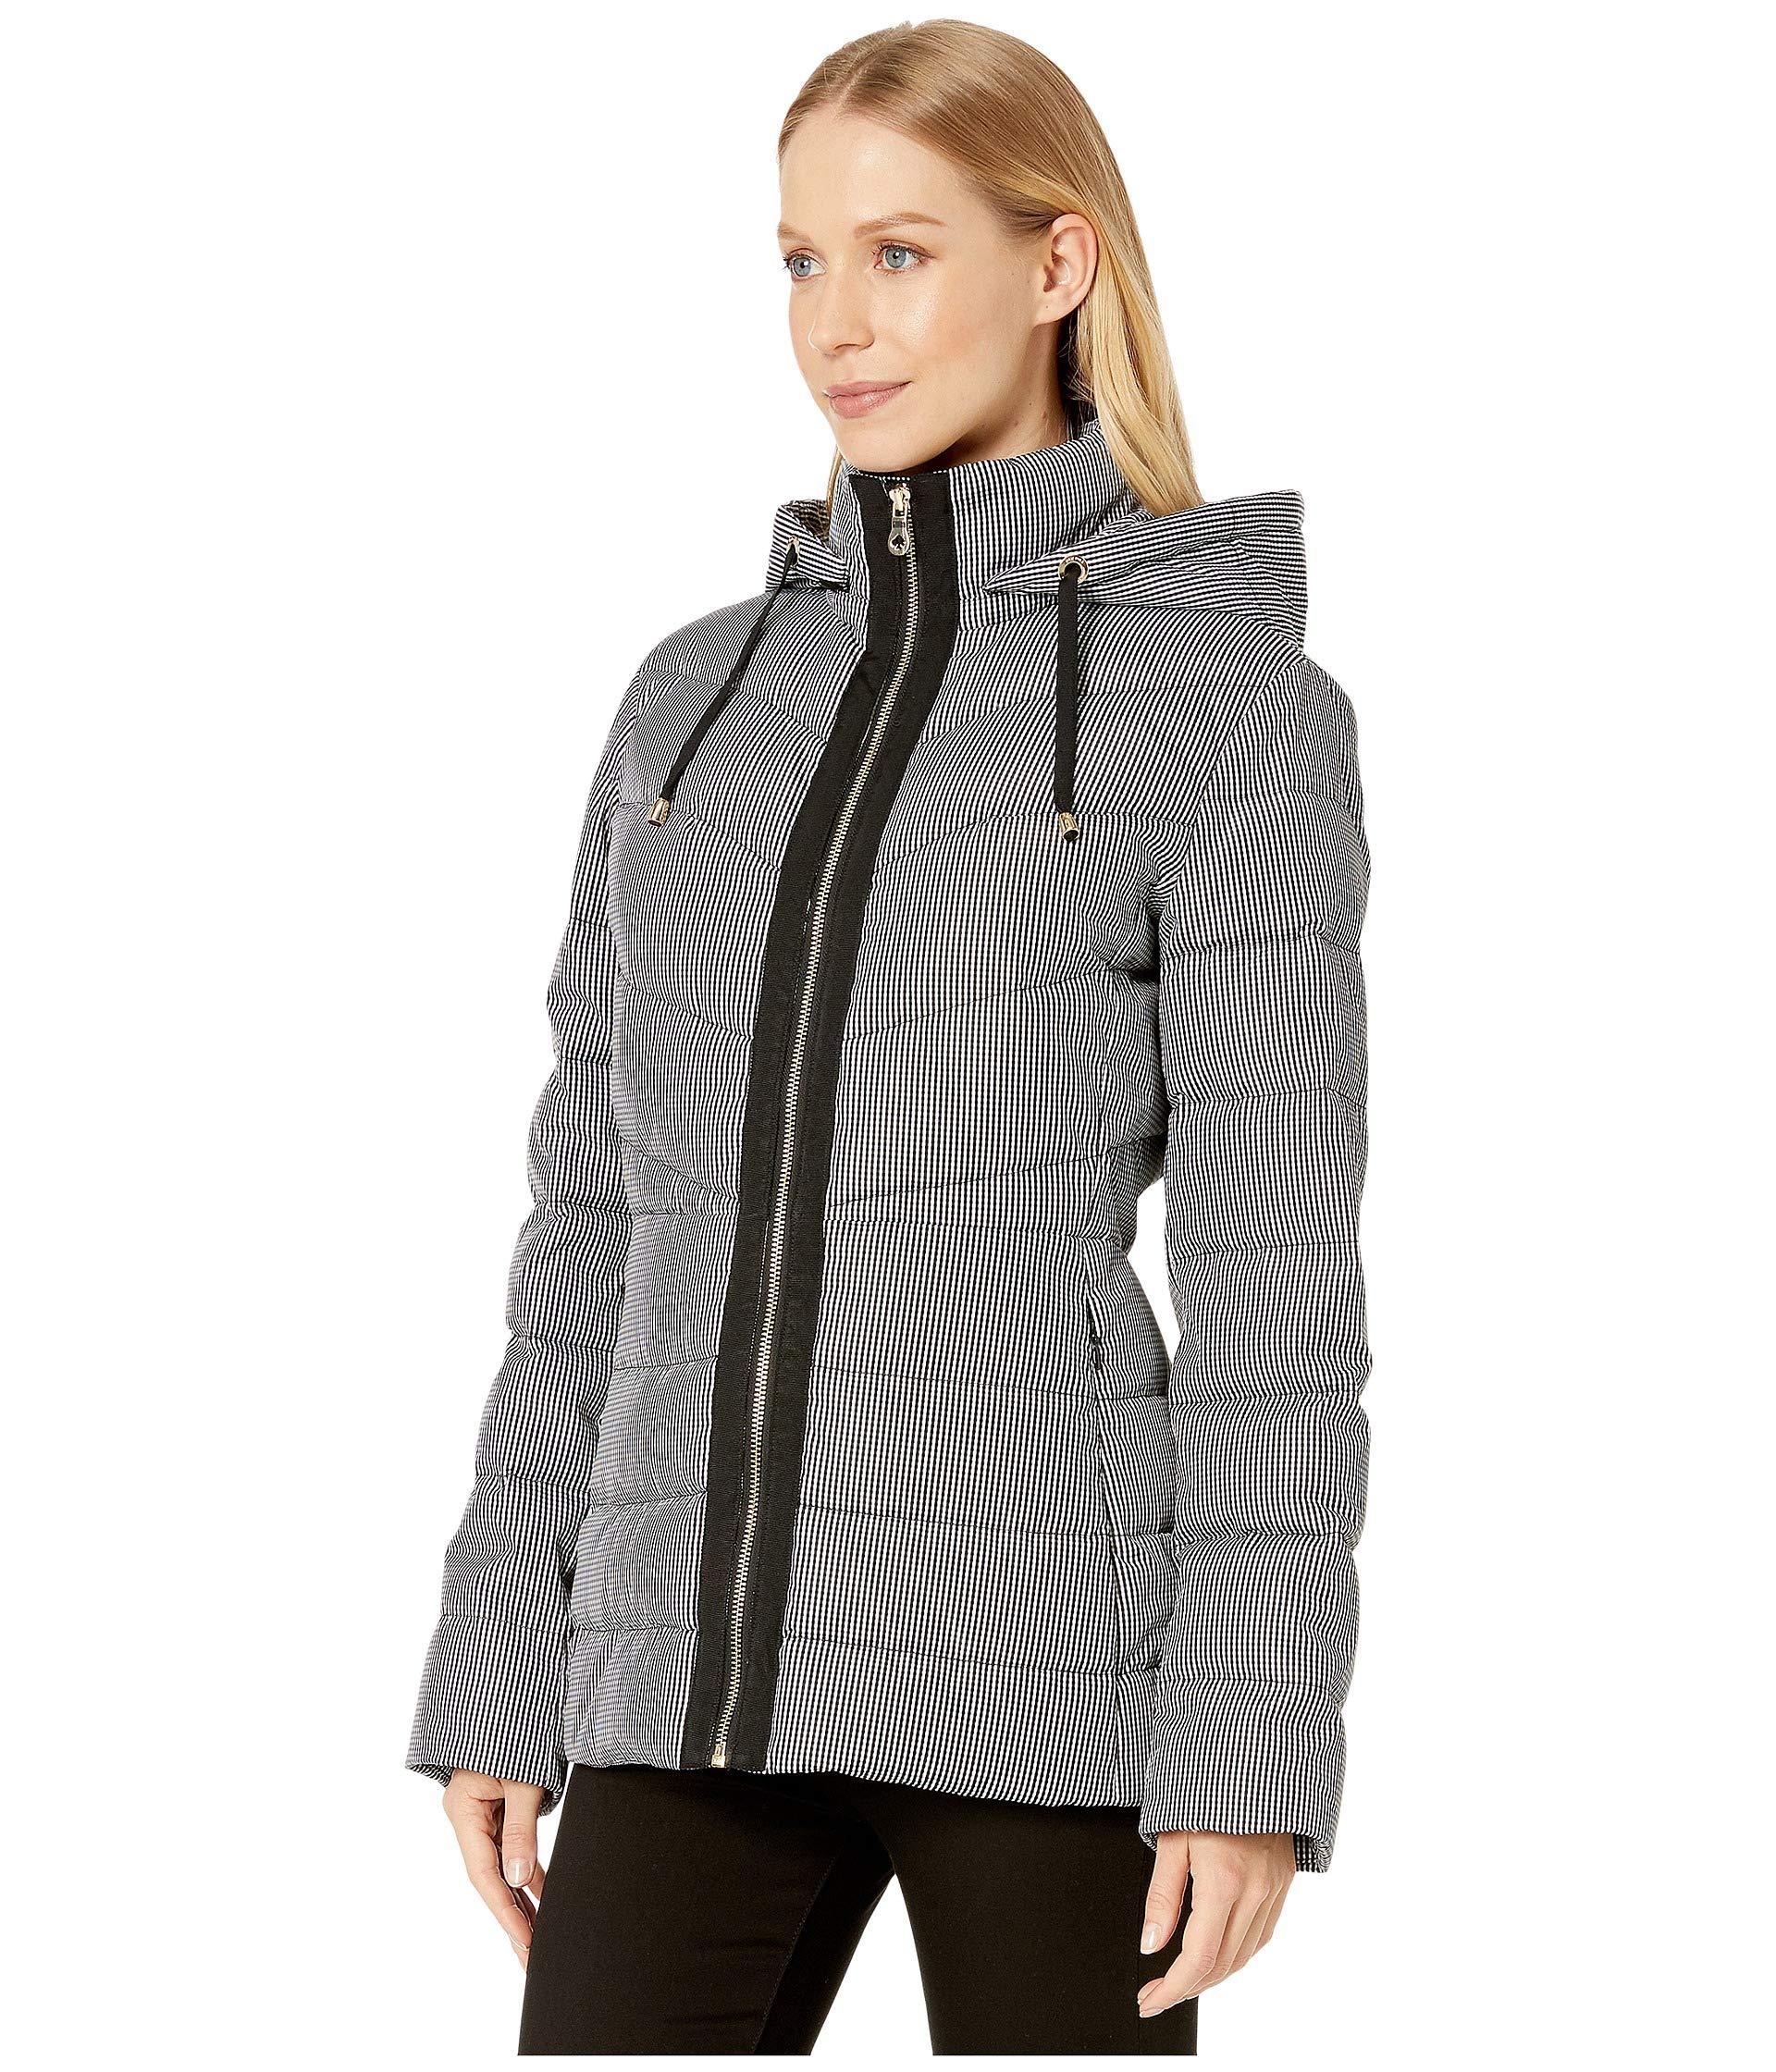 Kate Spade Synthetic Zip-up Down Jacket in Gray - Lyst